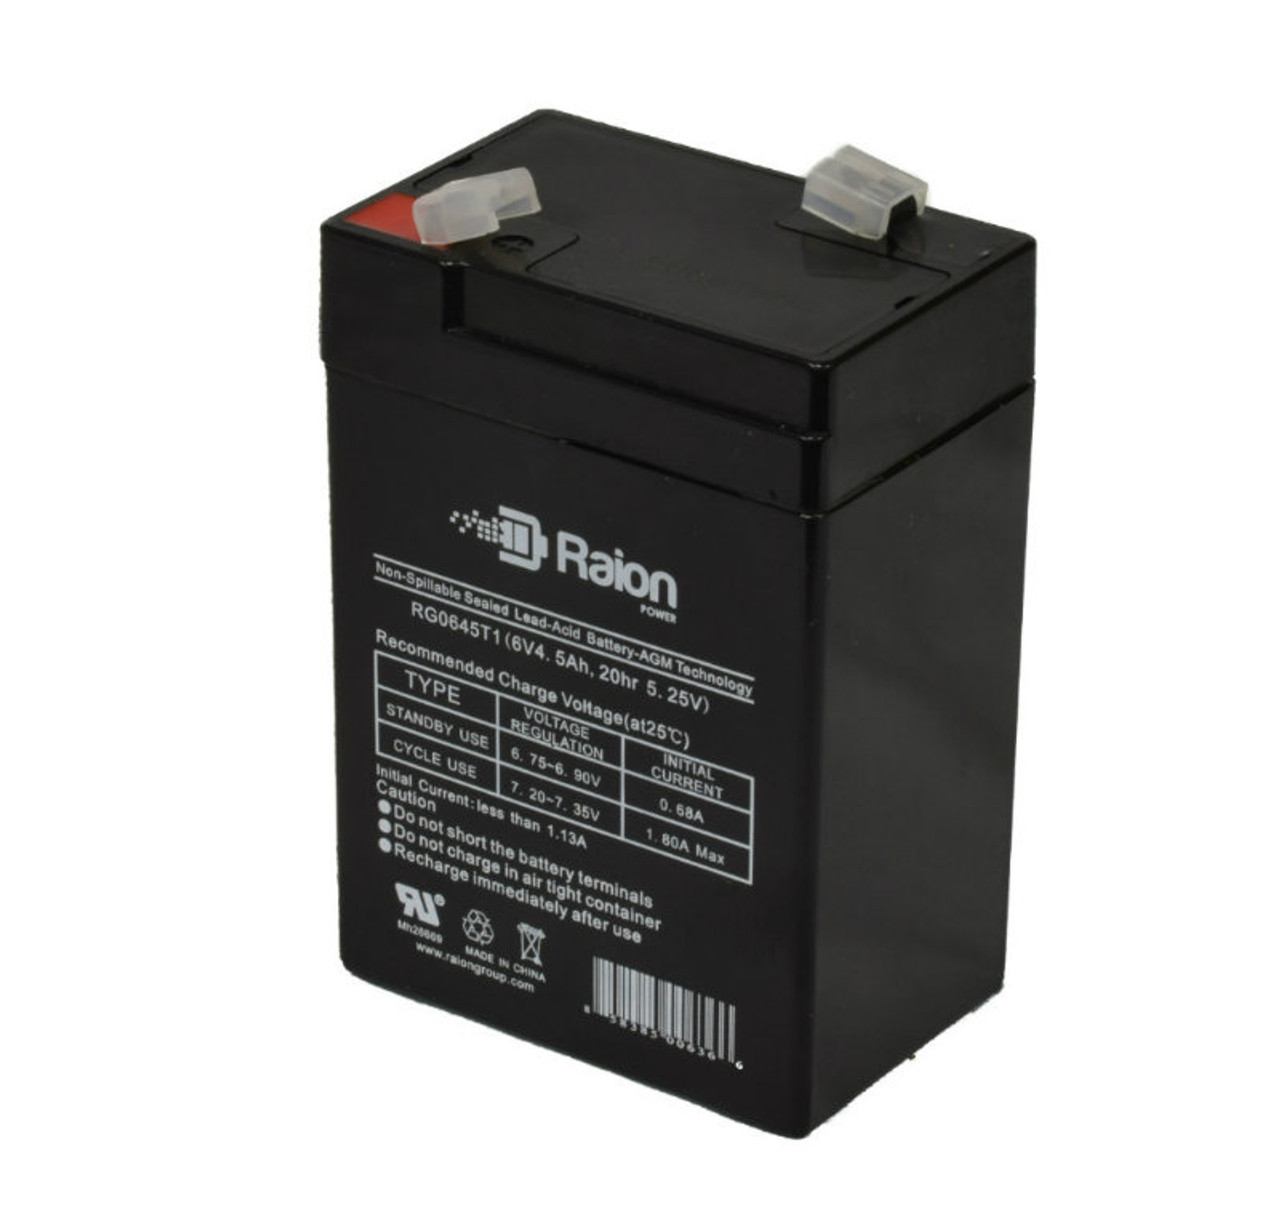 Raion Power RG0645T1 6V 4.5Ah Replacement Battery Cartridge for Edwards 1663